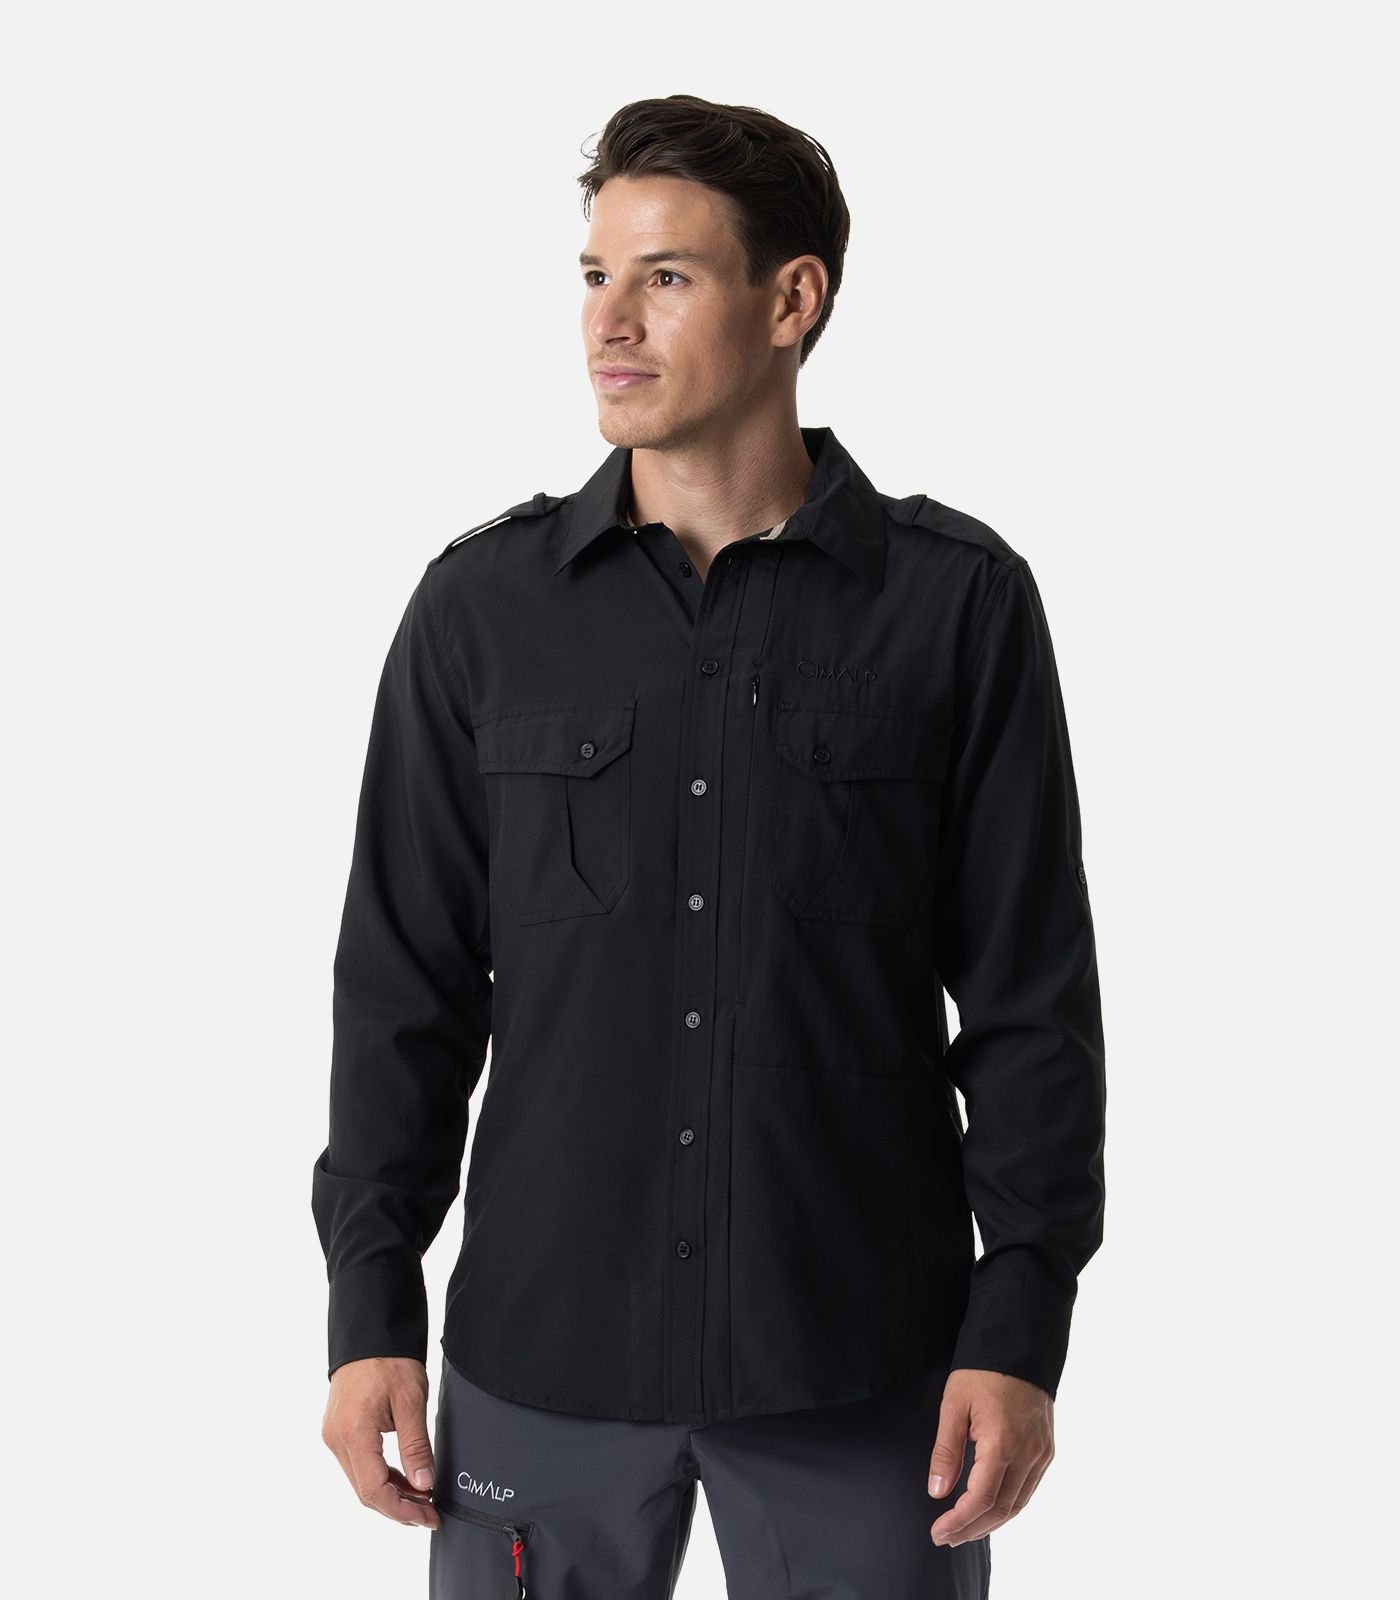 Long sleeved shirt - Mosquito repellent